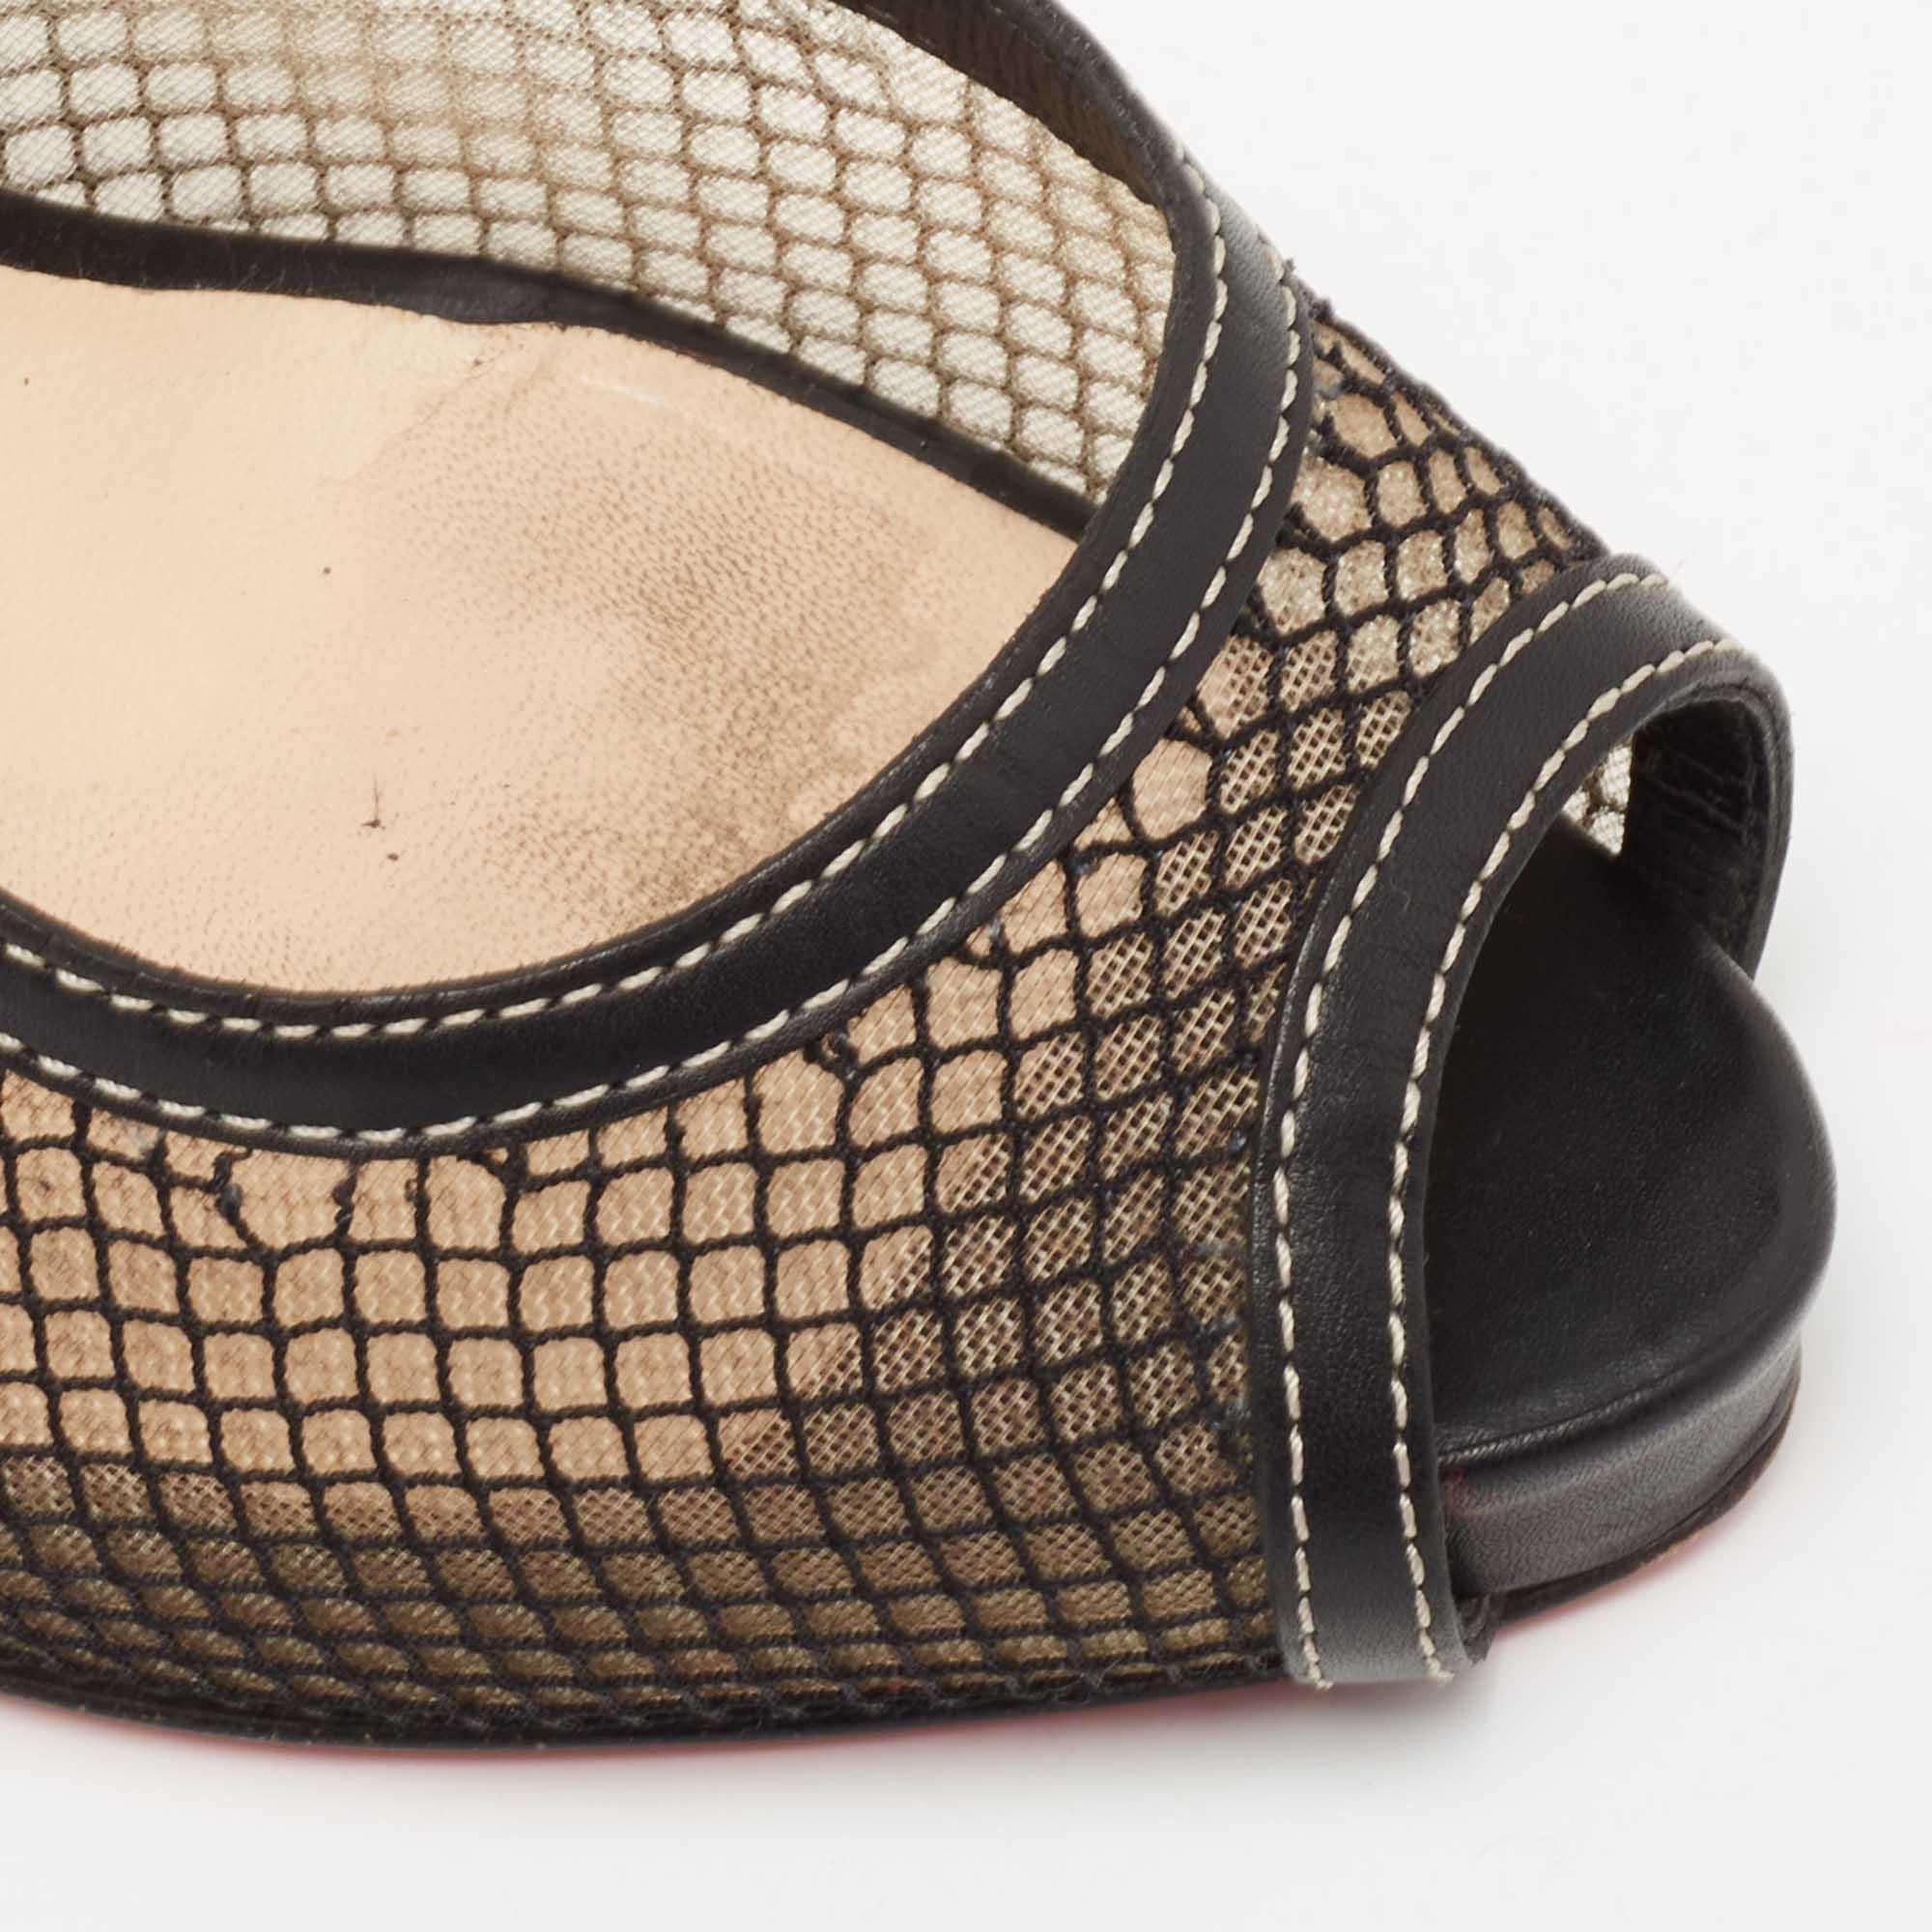 Christian Louboutin Black Fishnet and Leather Canne A Peche Slingback Peep-Toe P For Sale 3